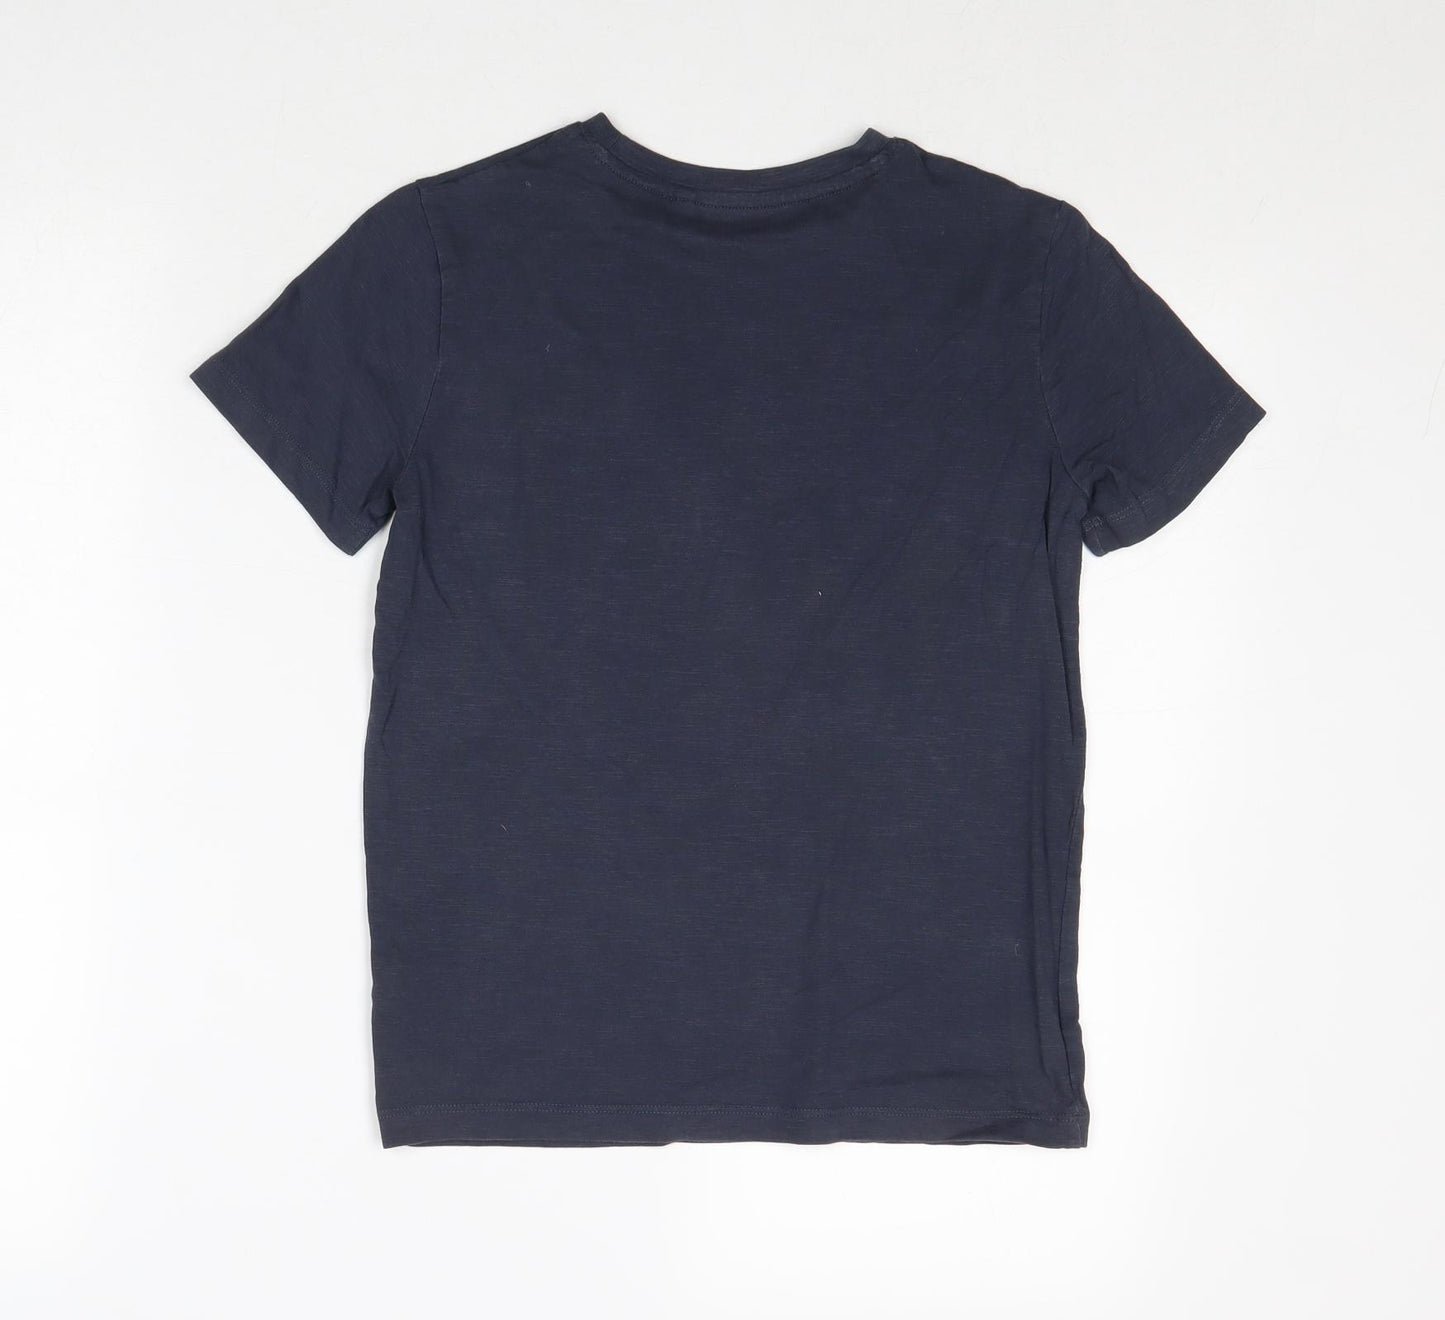 NEXT Boys Blue Cotton Basic T-Shirt Size 9 Years Round Neck Pullover